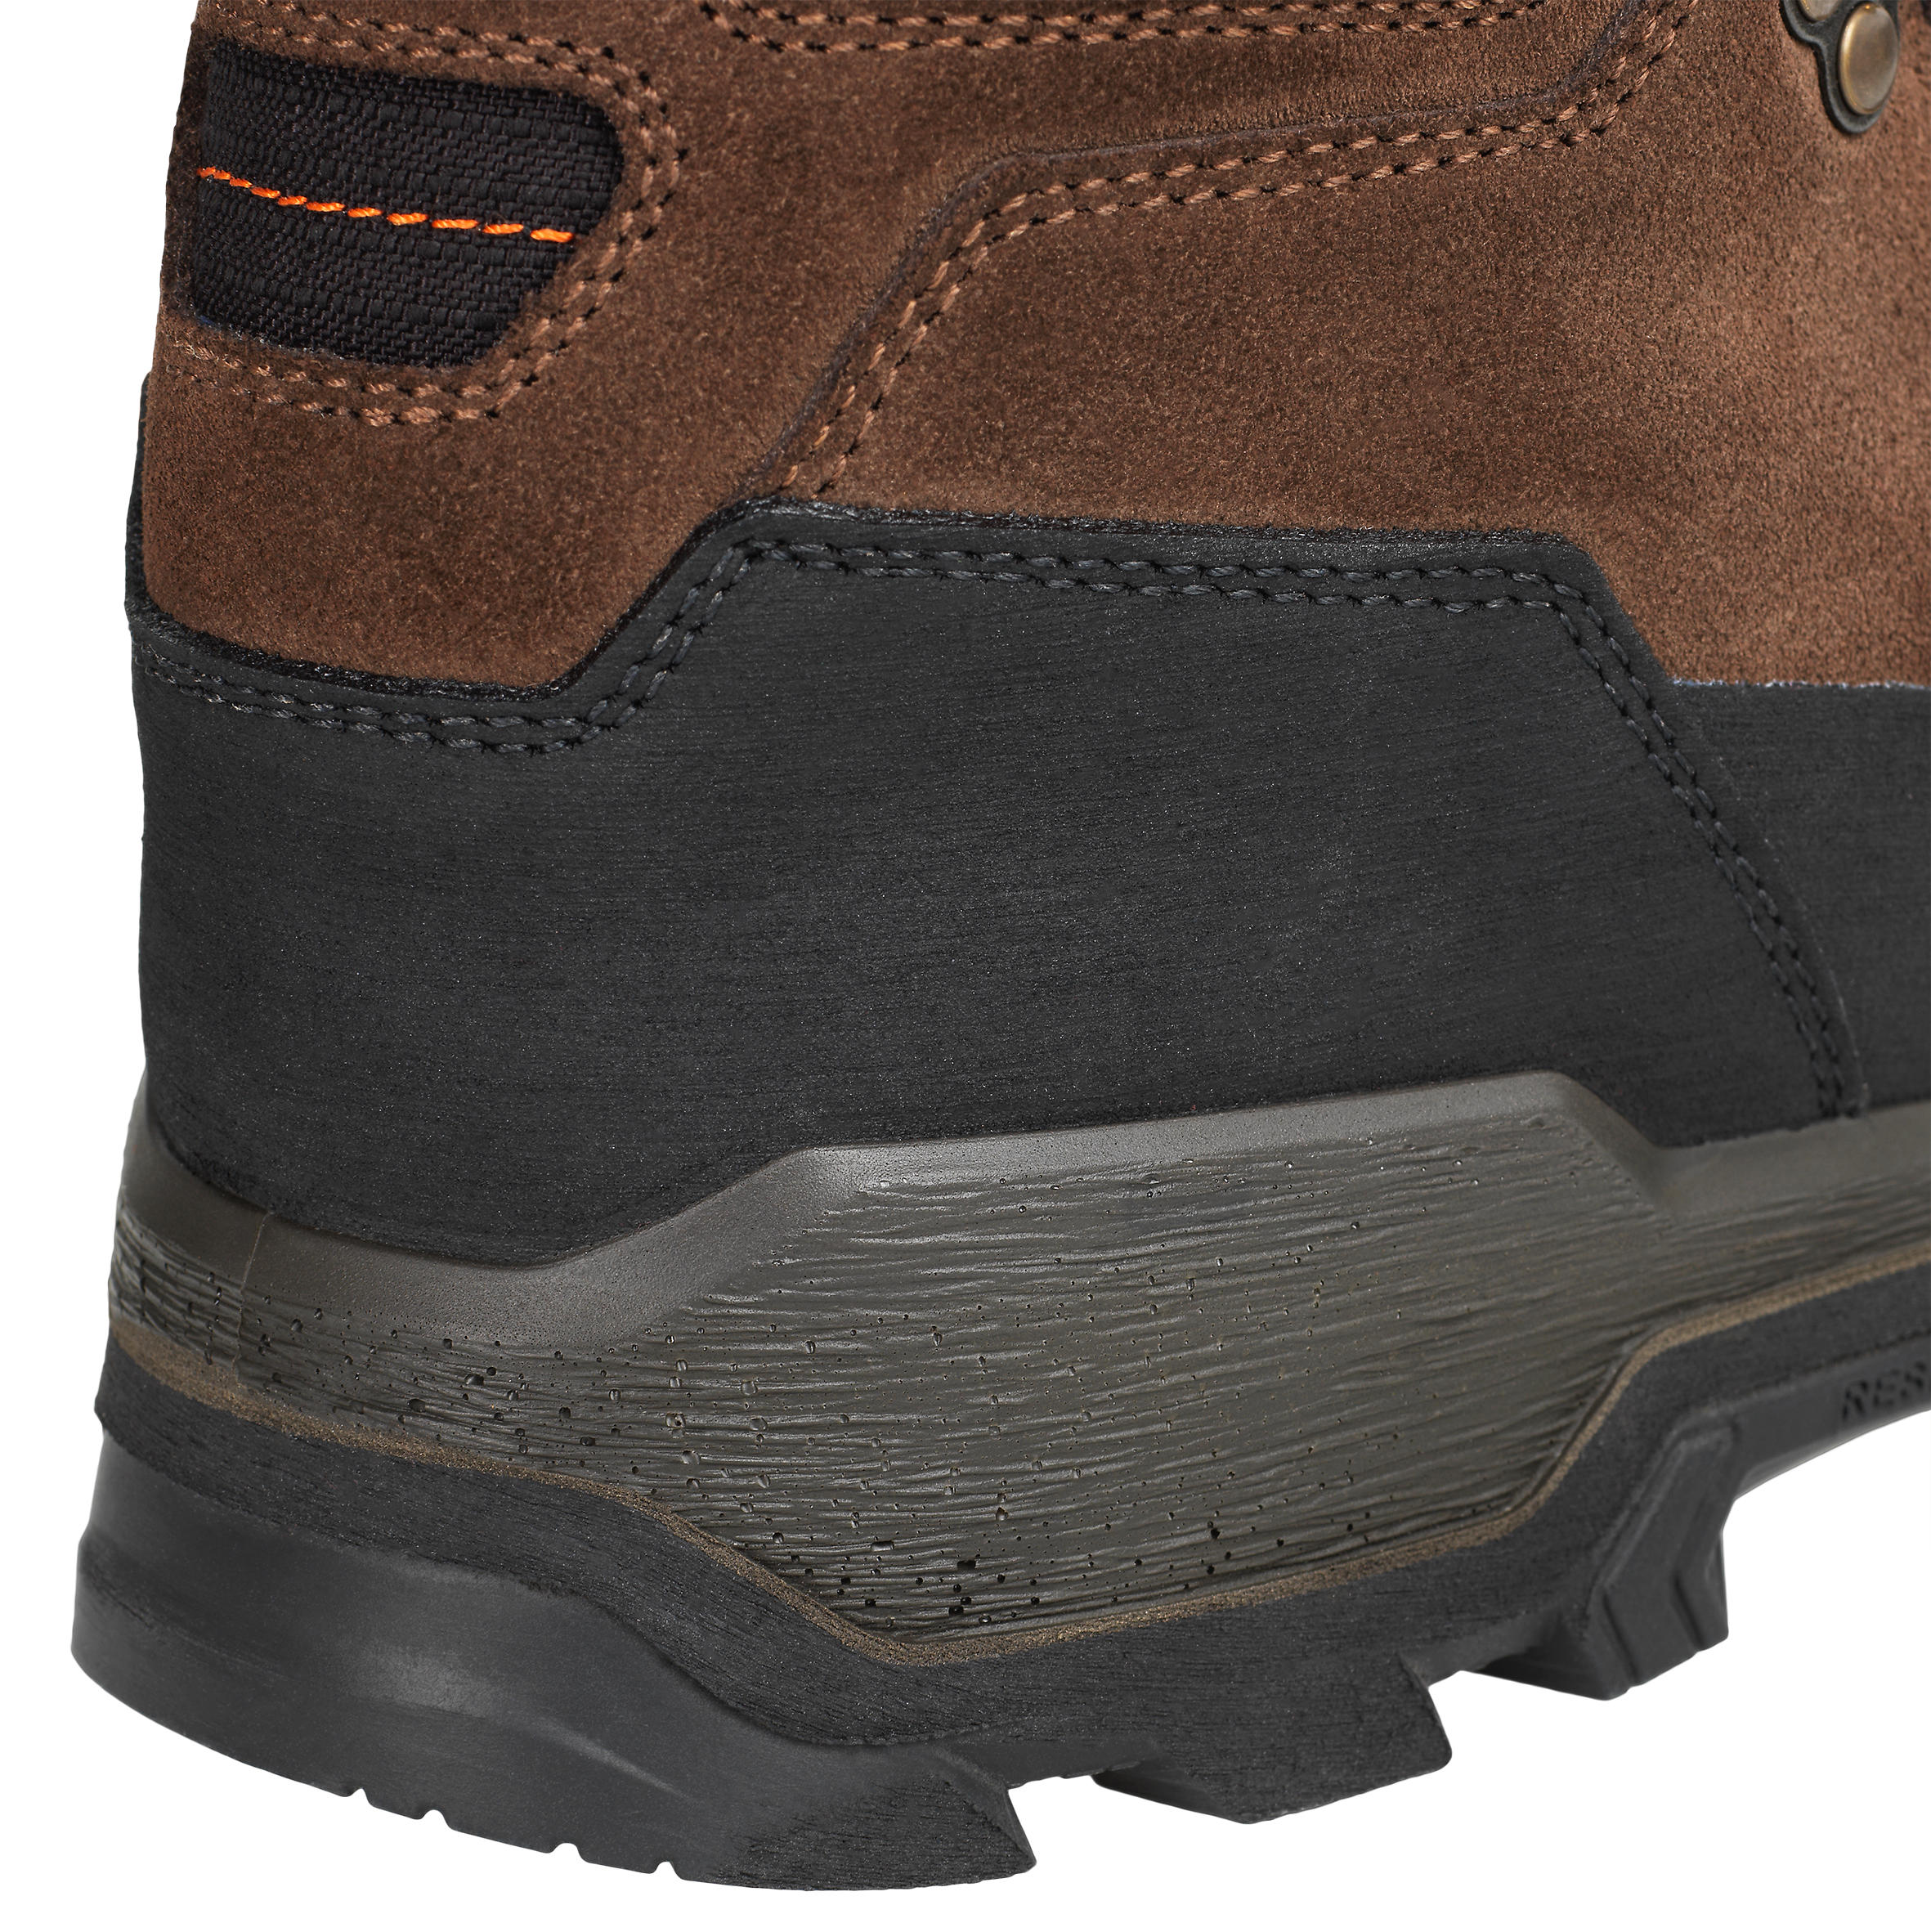 CROSSHUNT 500 WATERPROOF AND HARD-WEARING HUNTING BOOTS BROWN - SOLOGNAC